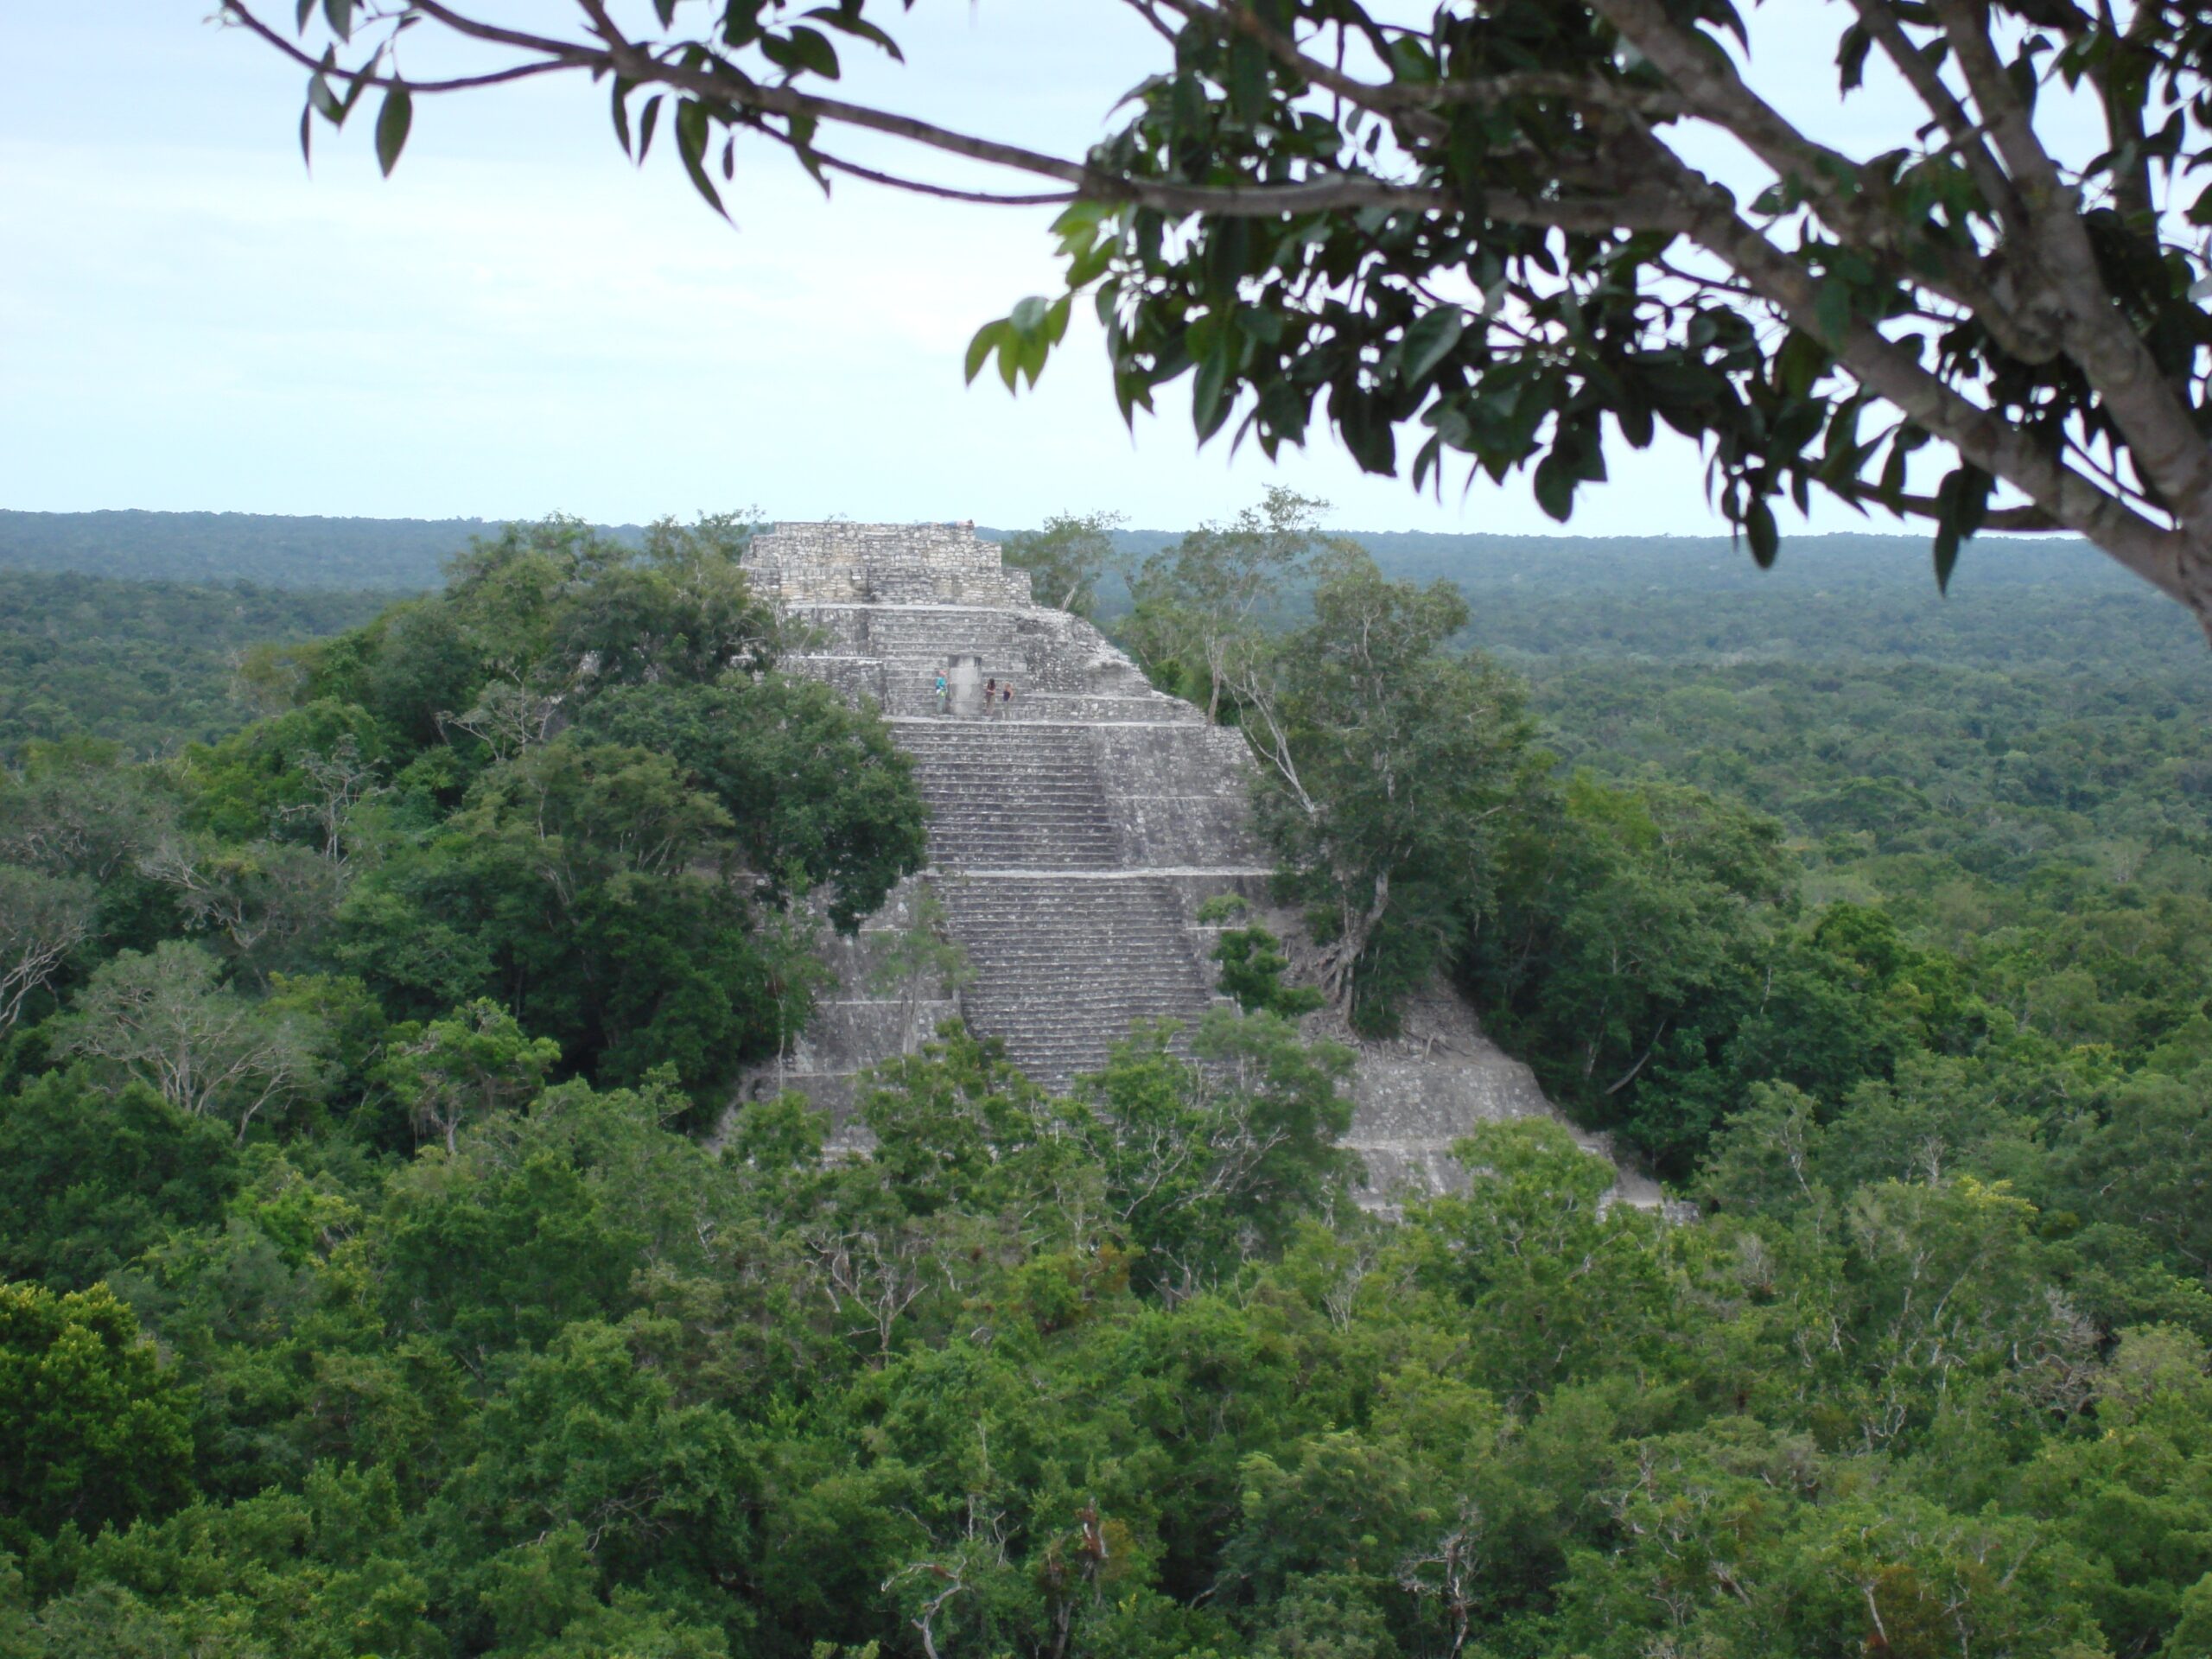 The Mayan ruins in Mexico, part of a wellness tour for women with Sacred Earth Journeys.